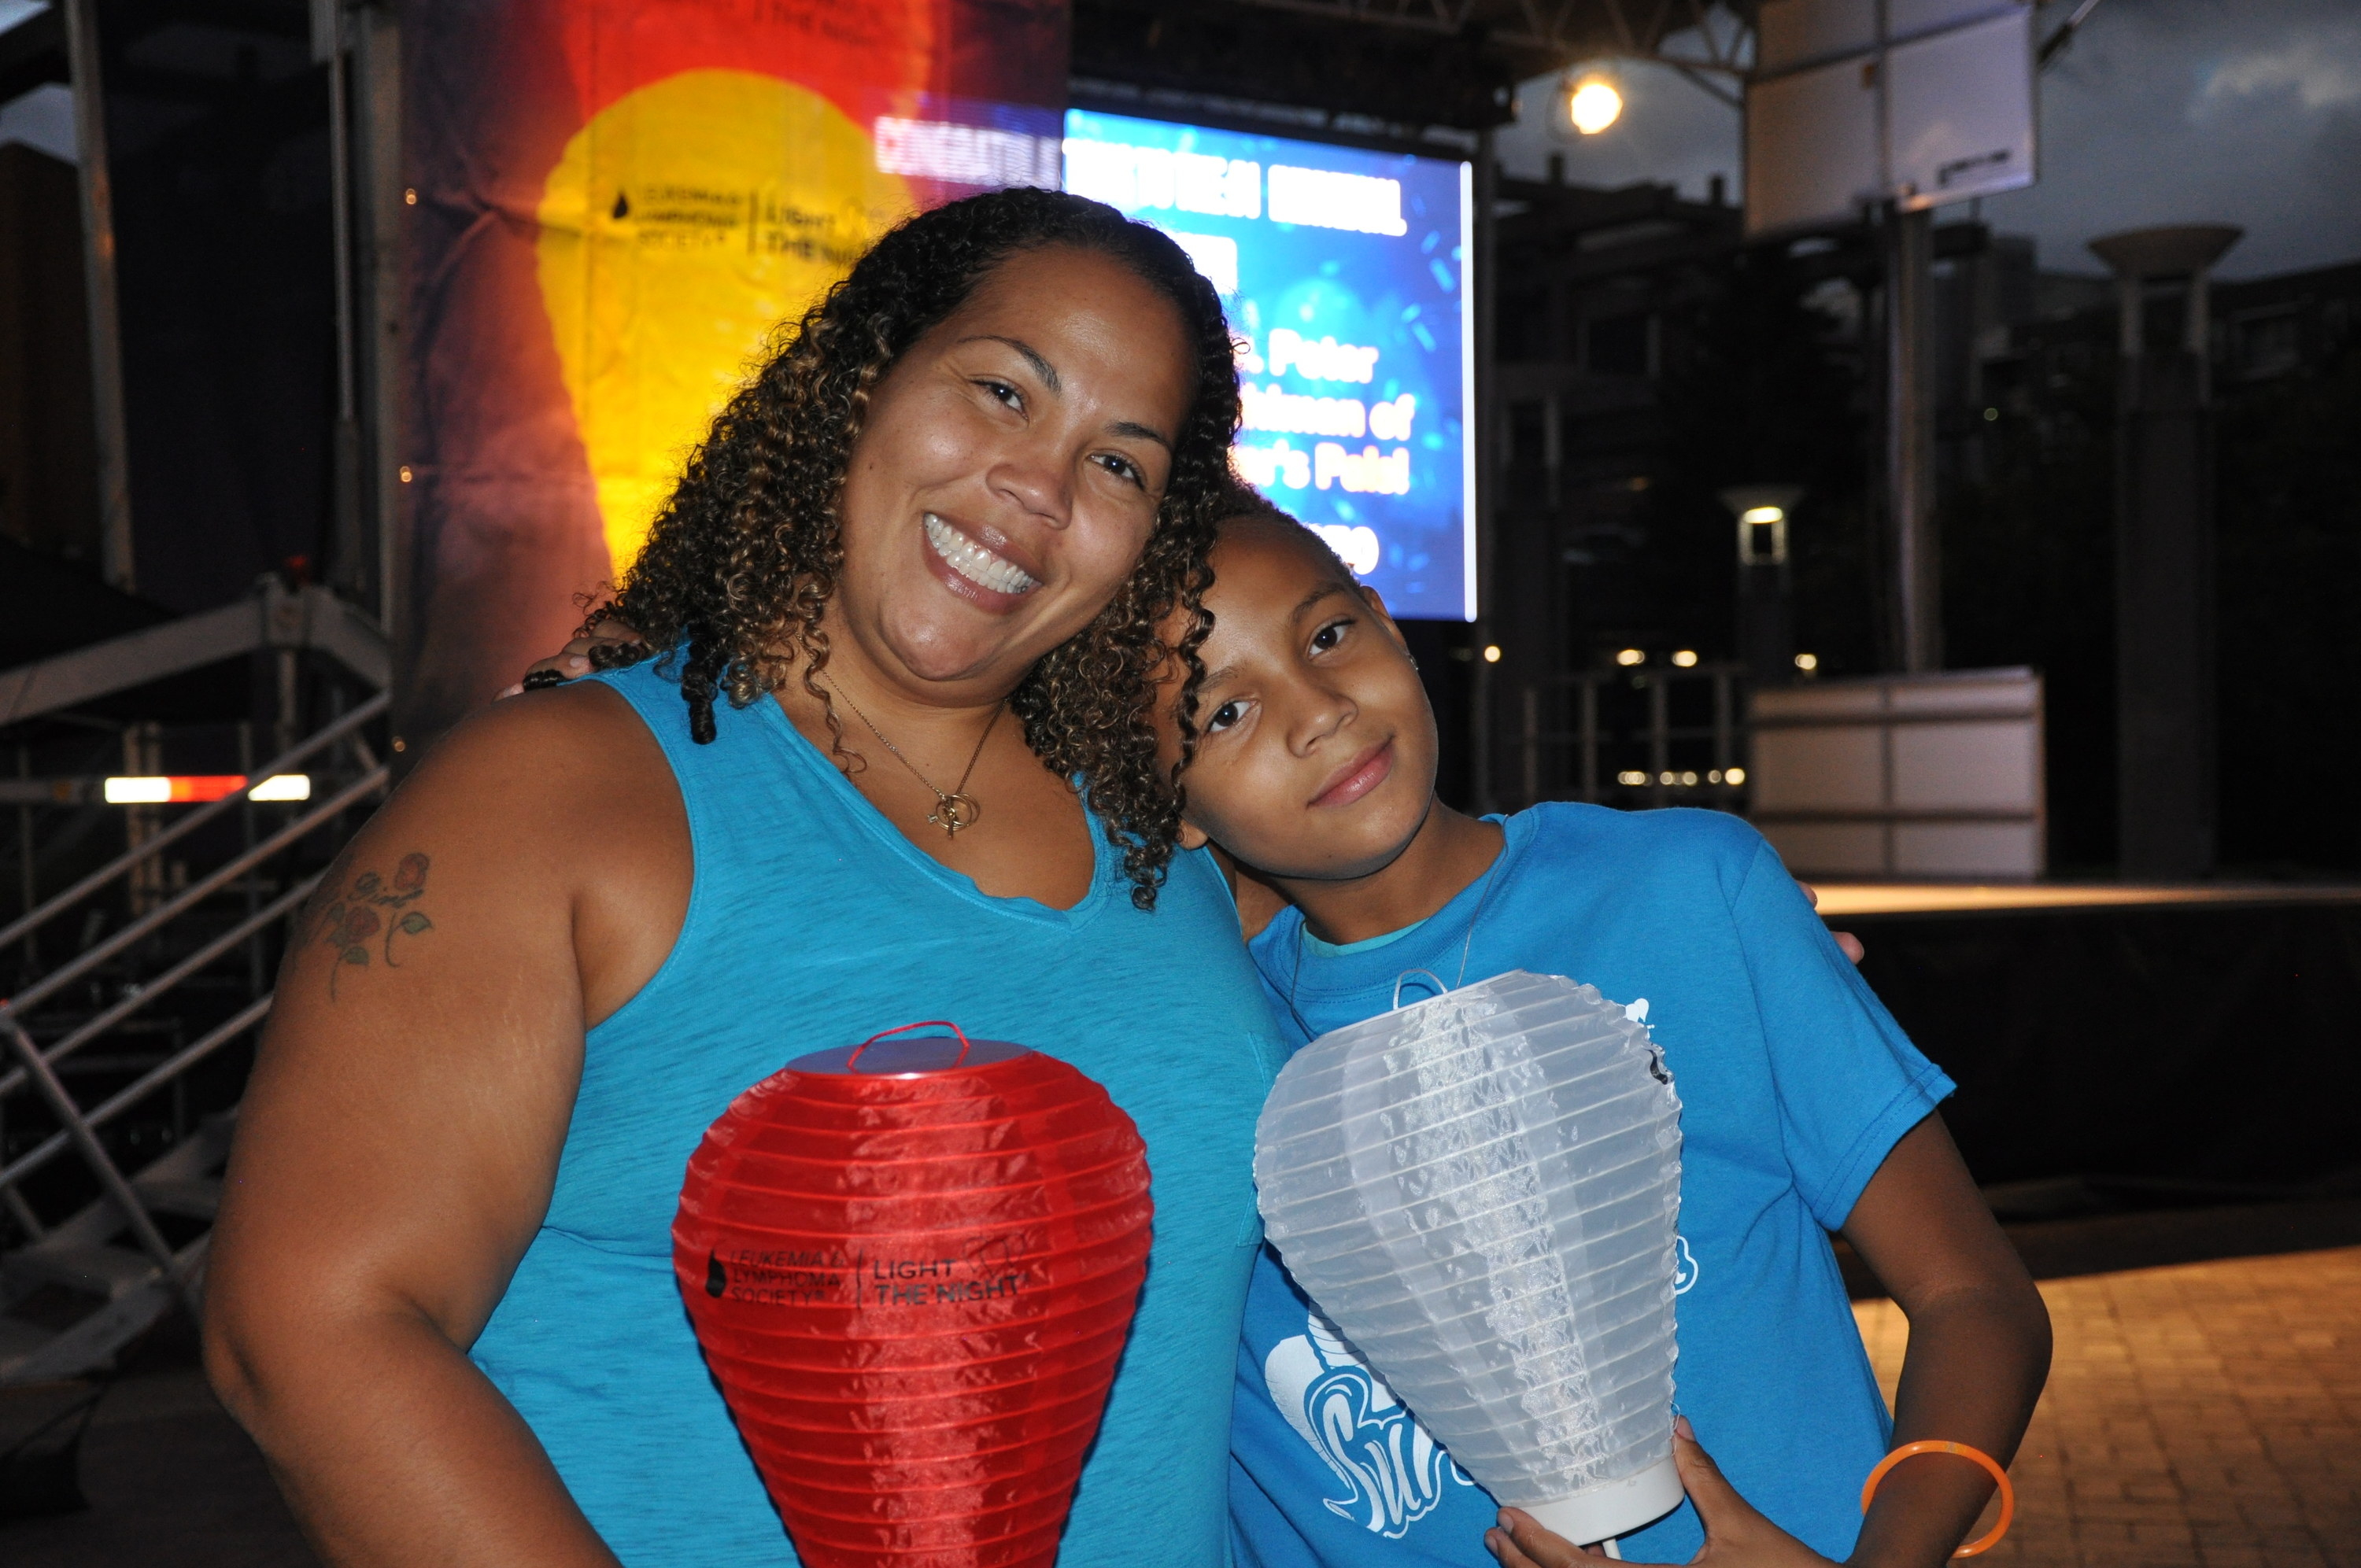 A mother and her son smiling at the camera while holding unlit paper lanterns